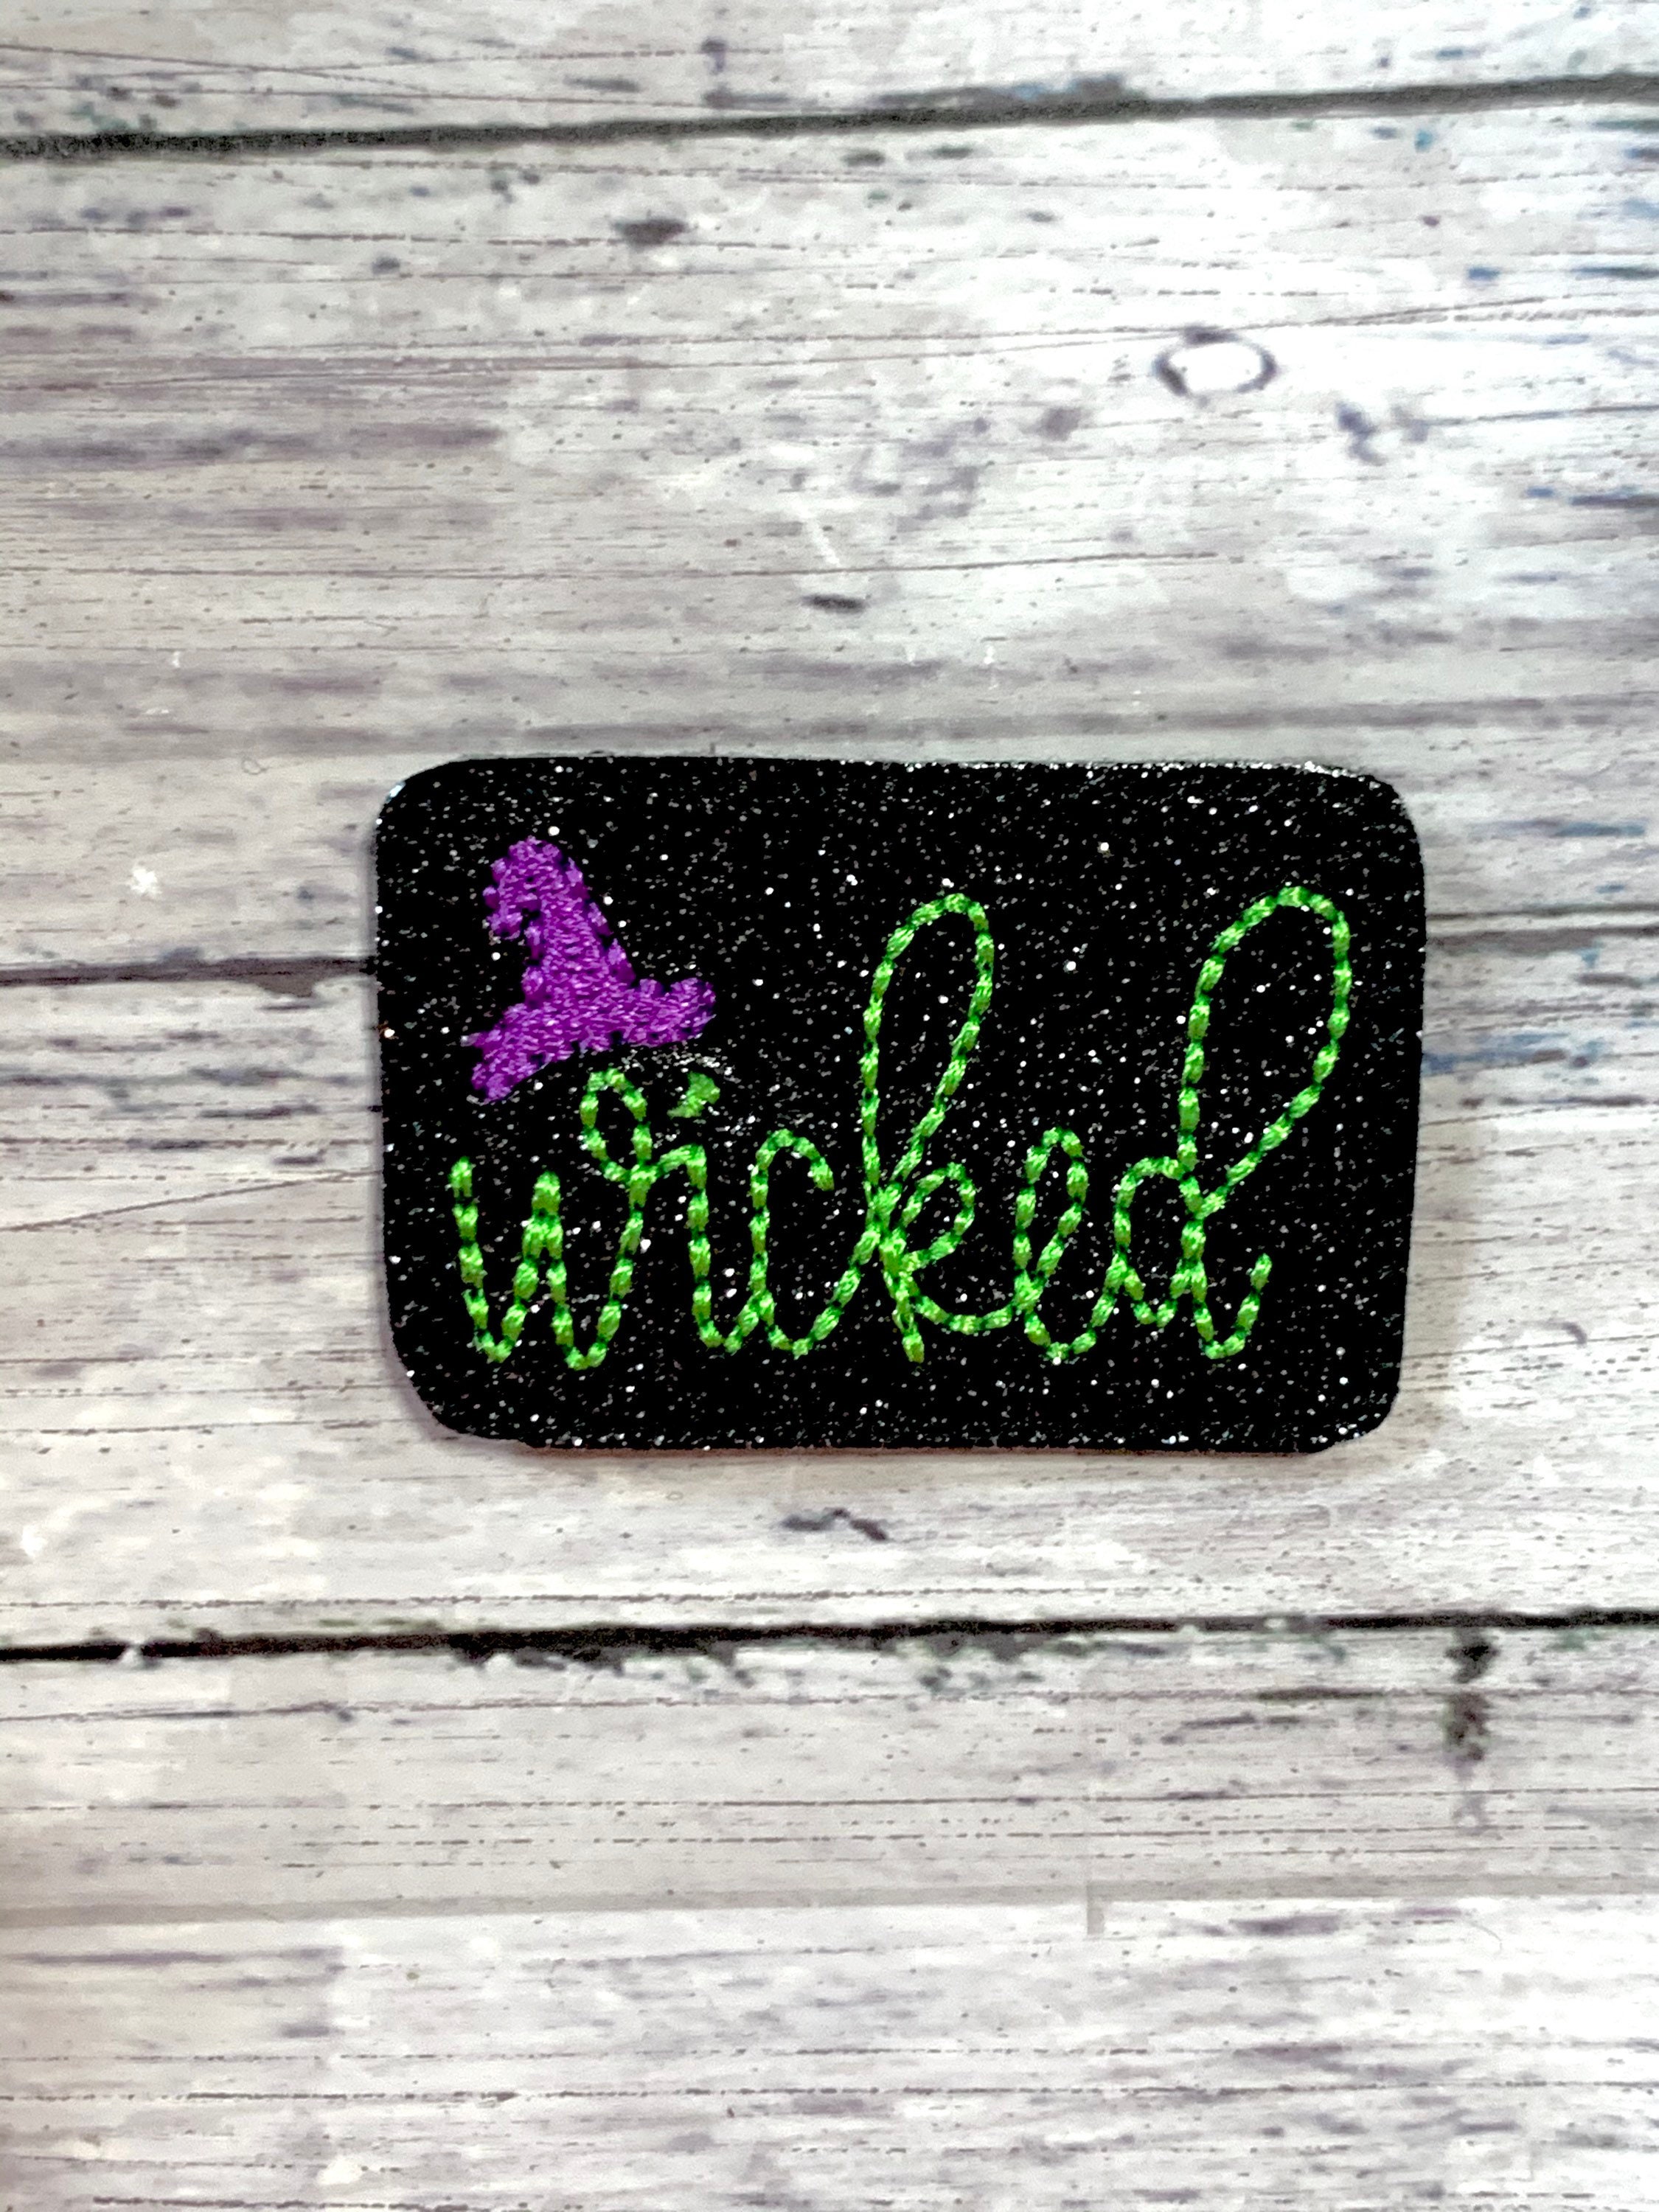 Wicked Badge Reel, Halloween Badge Holder, Spooky Witch Badge Clip, ID Name Tag Holder, Nurse Badge Pull, Badge Reel Topper, Badge Buddy